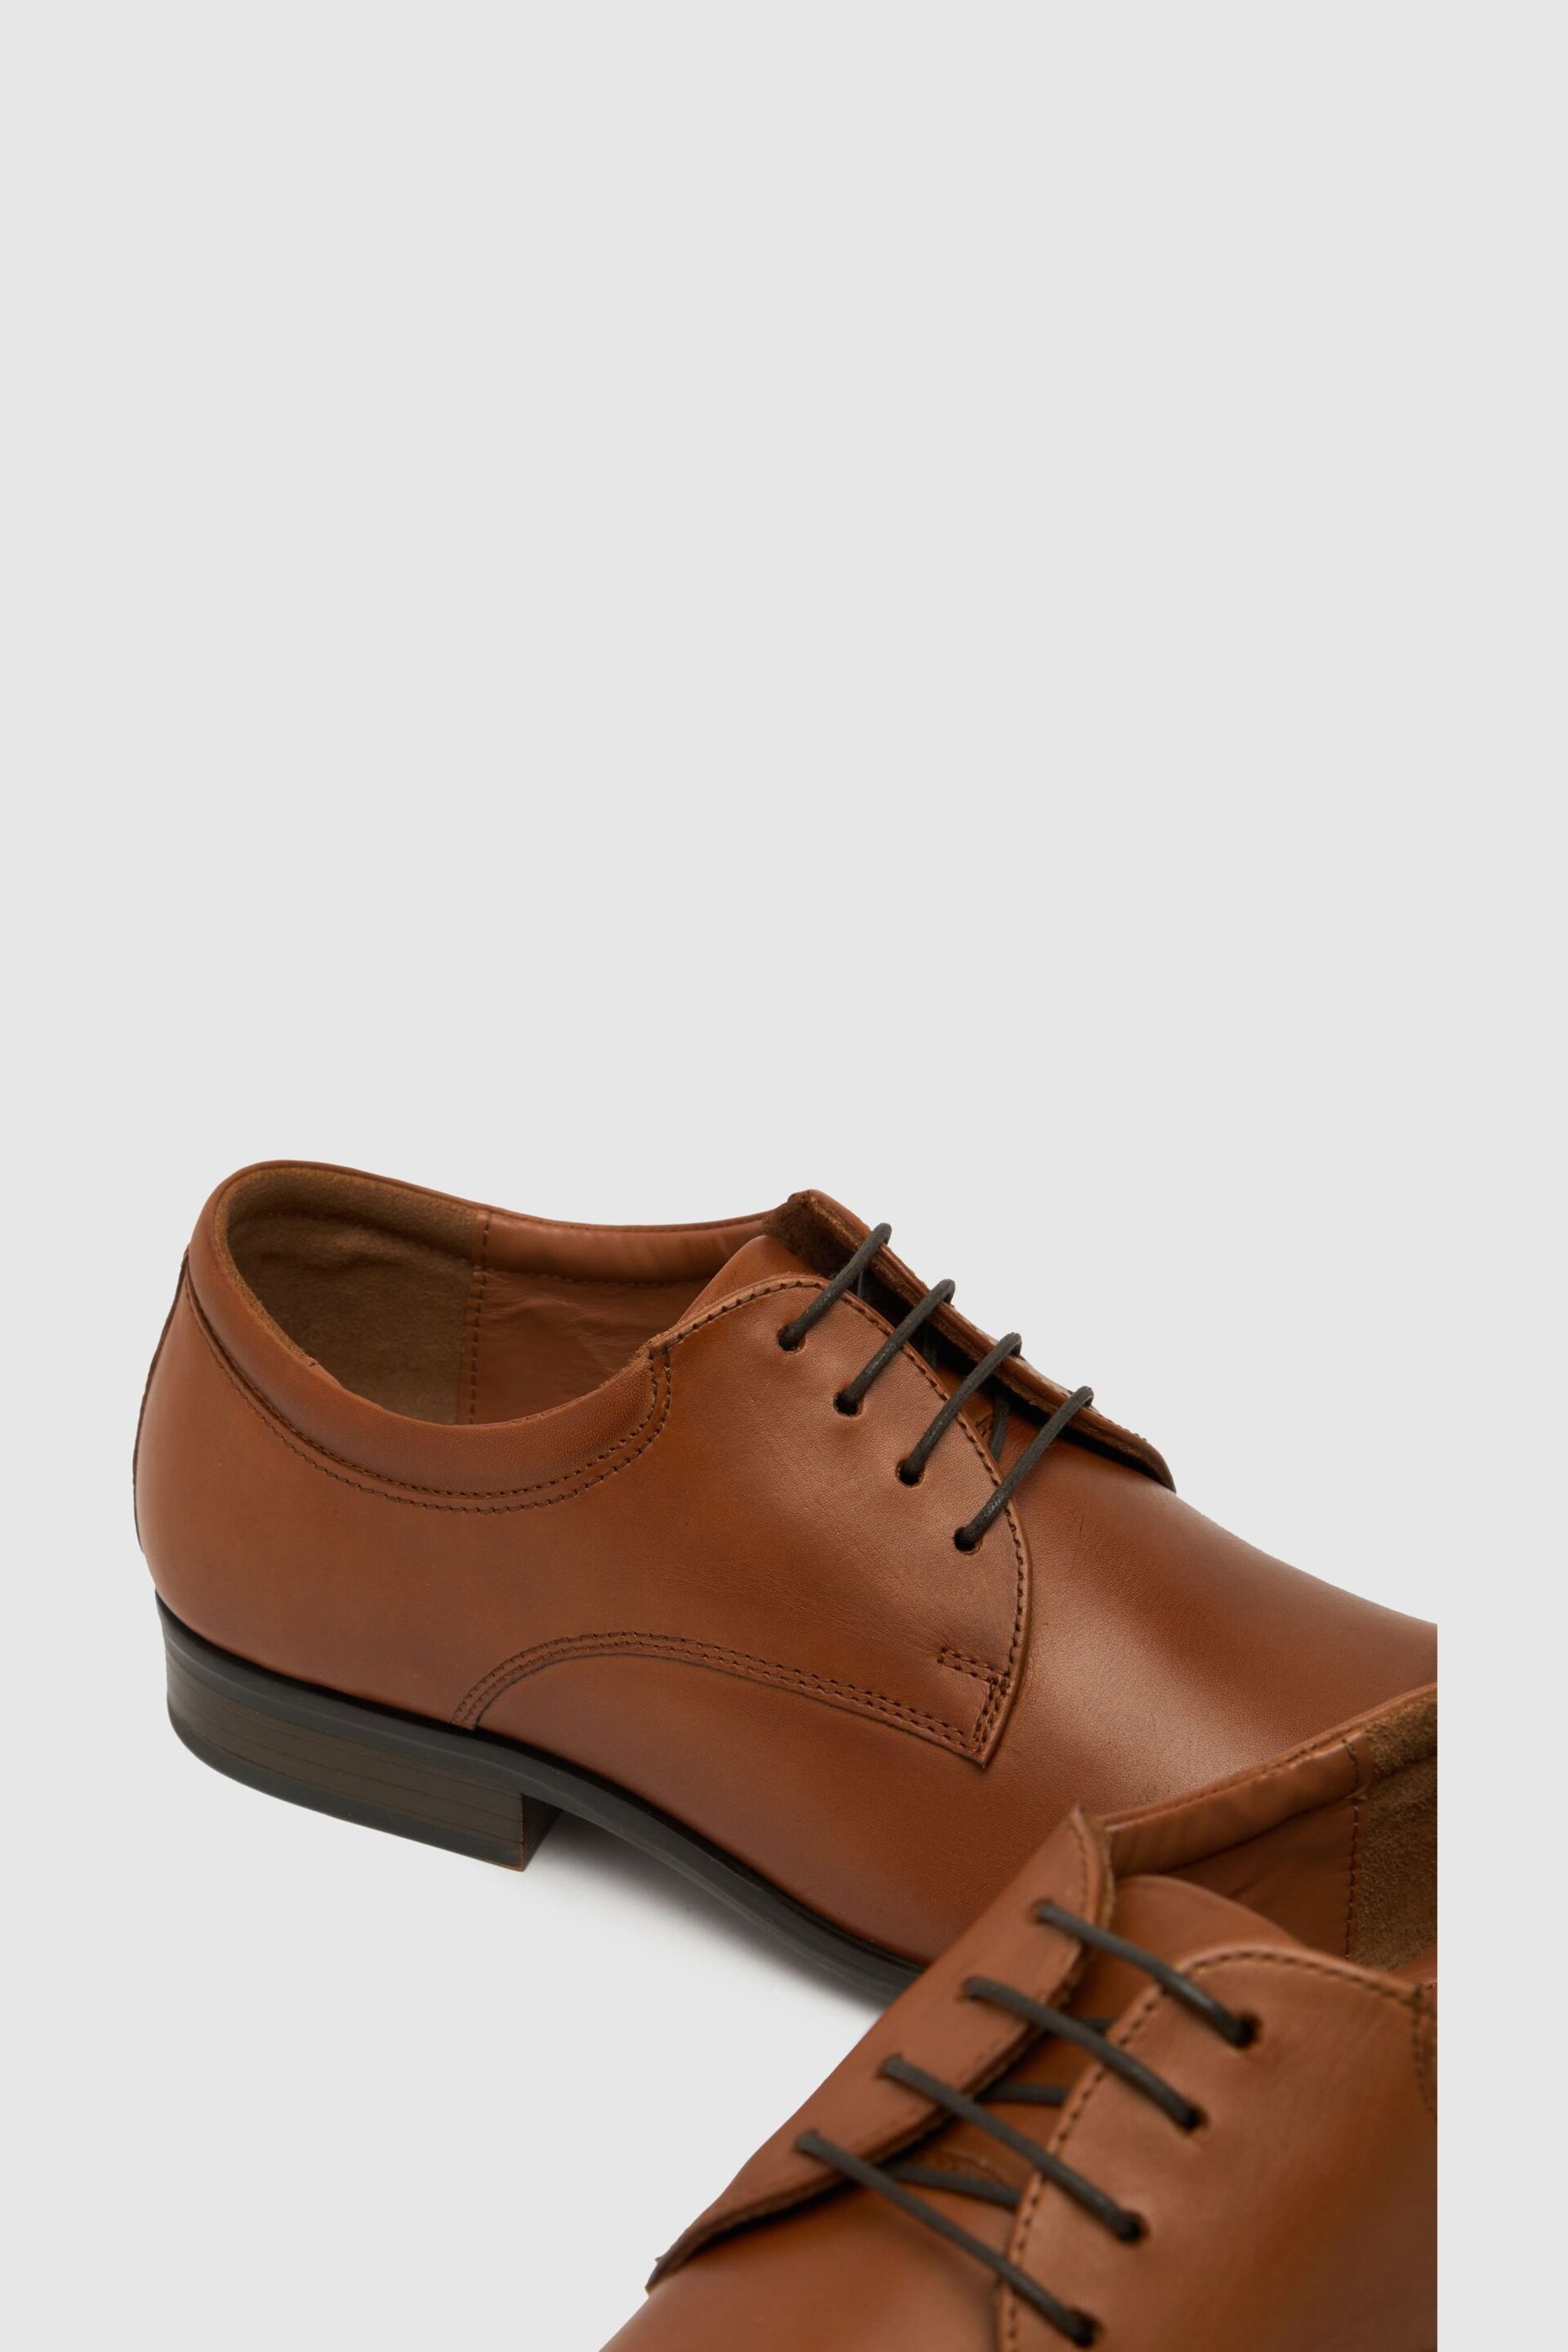 Schuh Ray Leather Derby Shoes - Image 4 of 4